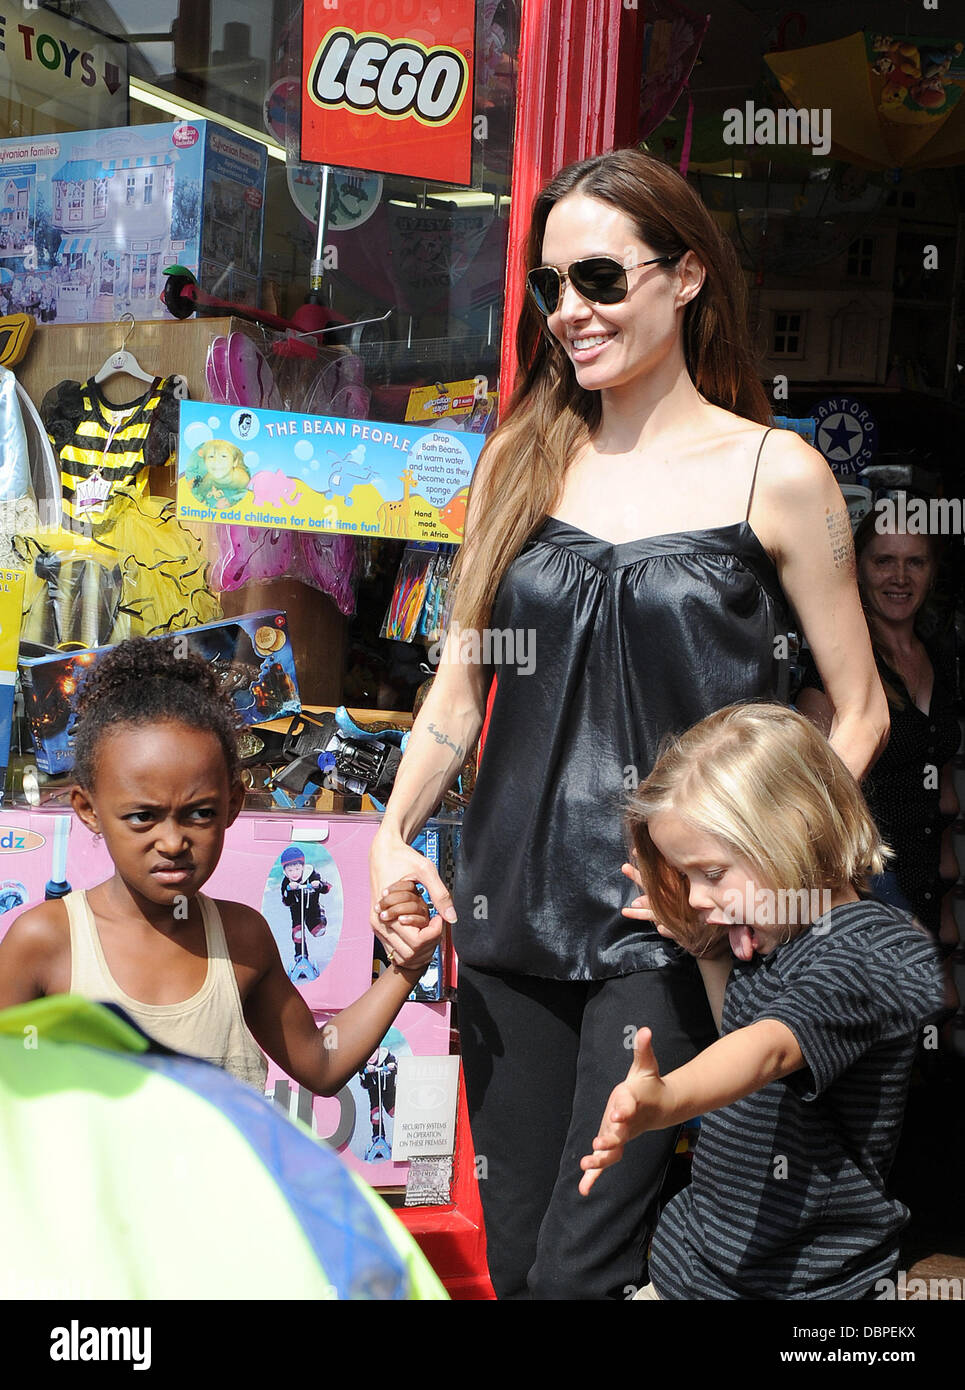 Angelina Jolie and daughters Zahara Jolie-Pitt and Shiloh Nouvel Jolie-Pitt  leaving the Toy Station Richmond, Surrey - 15.08.11 Stock Photo - Alamy